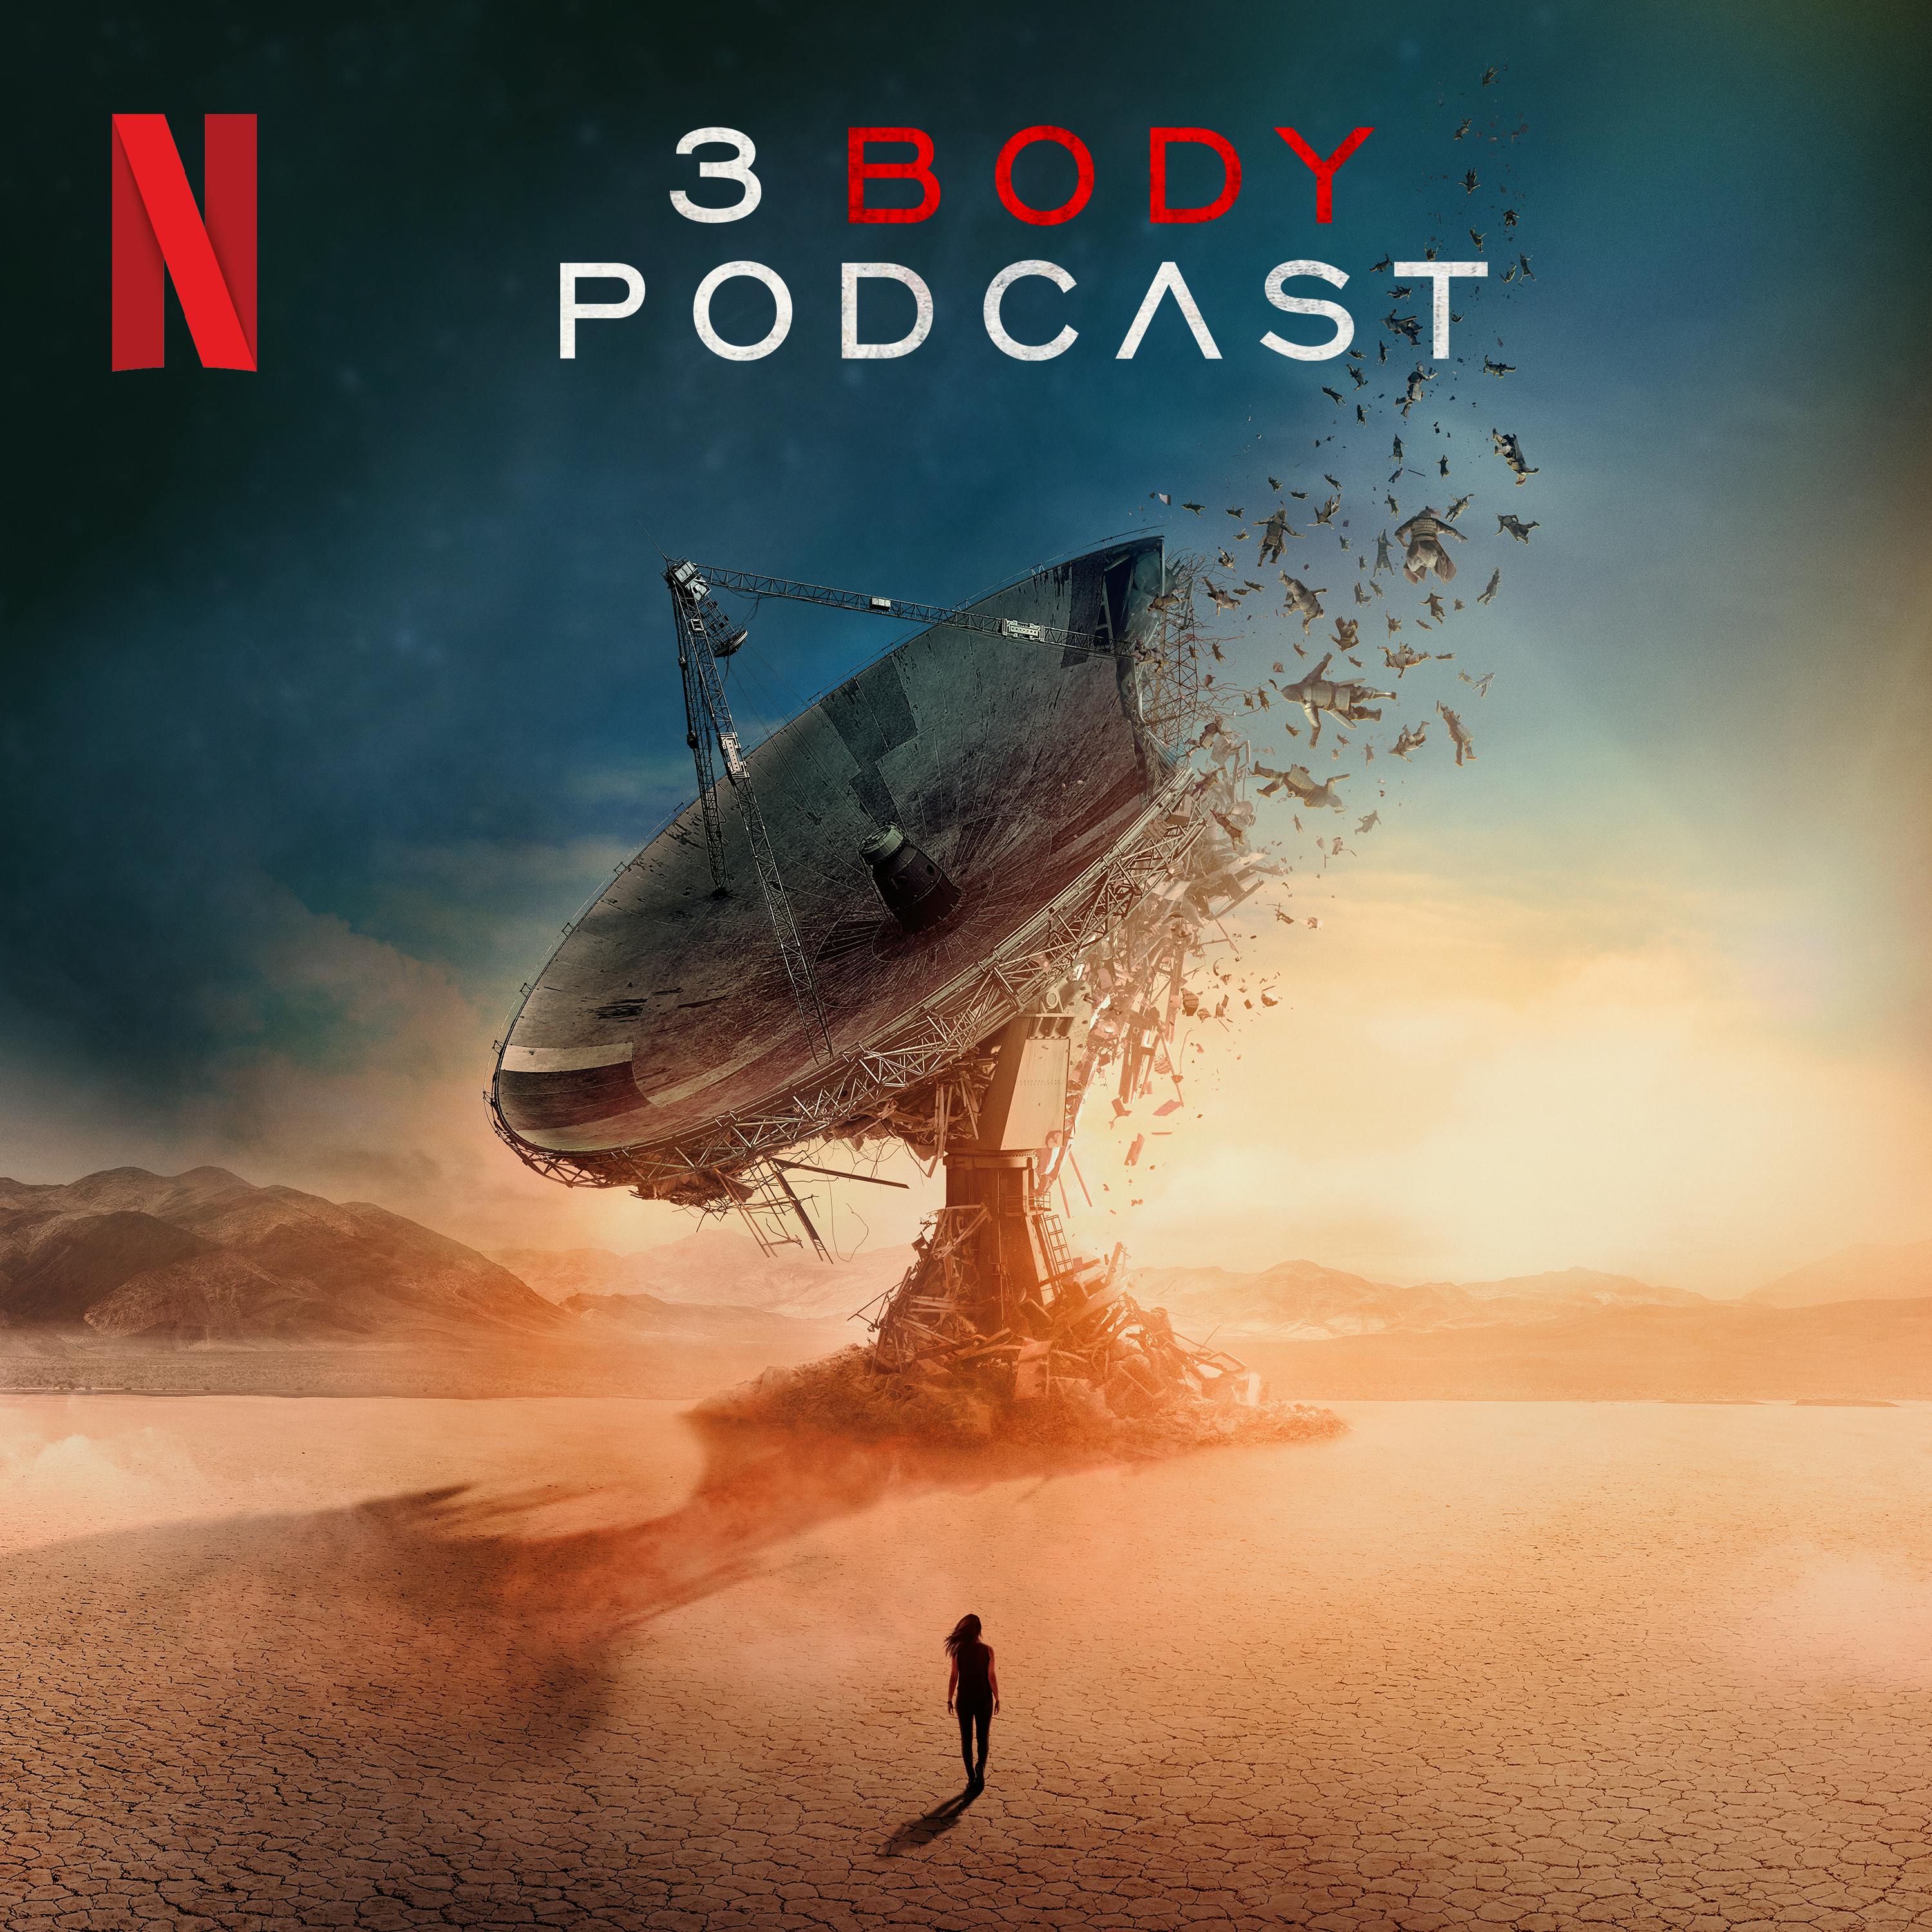 Coming Soon…The 3 Body Podcast